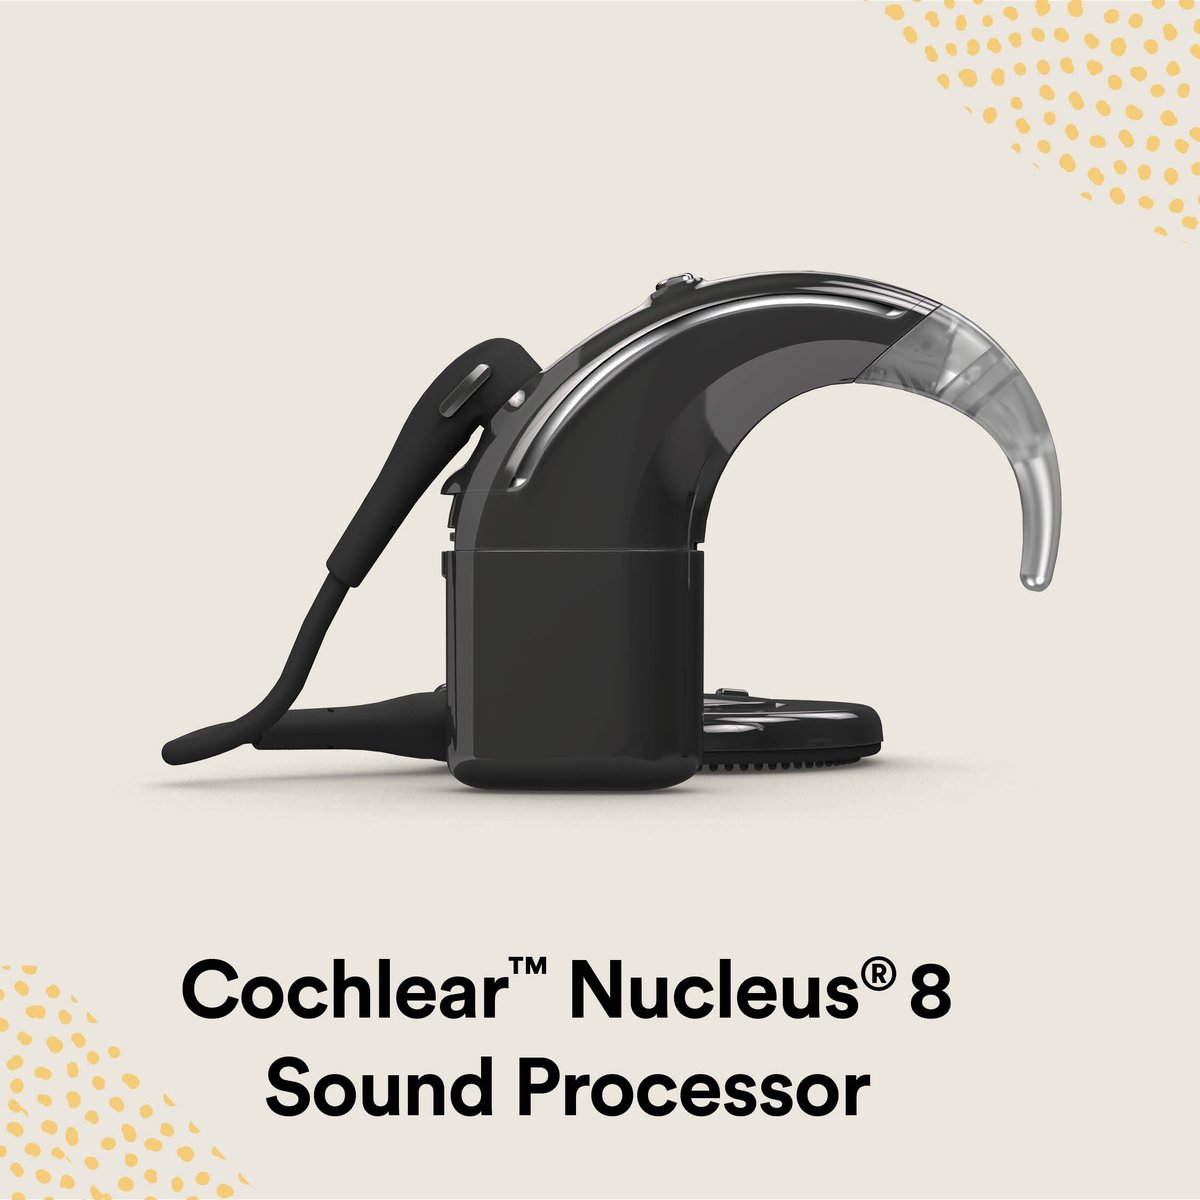 Nancy noticed the difference her #Nucleus8 Sound Processors made from the moment she put them on. Find out how you could enjoy the comfort of the world’s smallest and lightest behind-the-ear sound processor.

Views expressed are those of the individual. #HearNowAndAlways